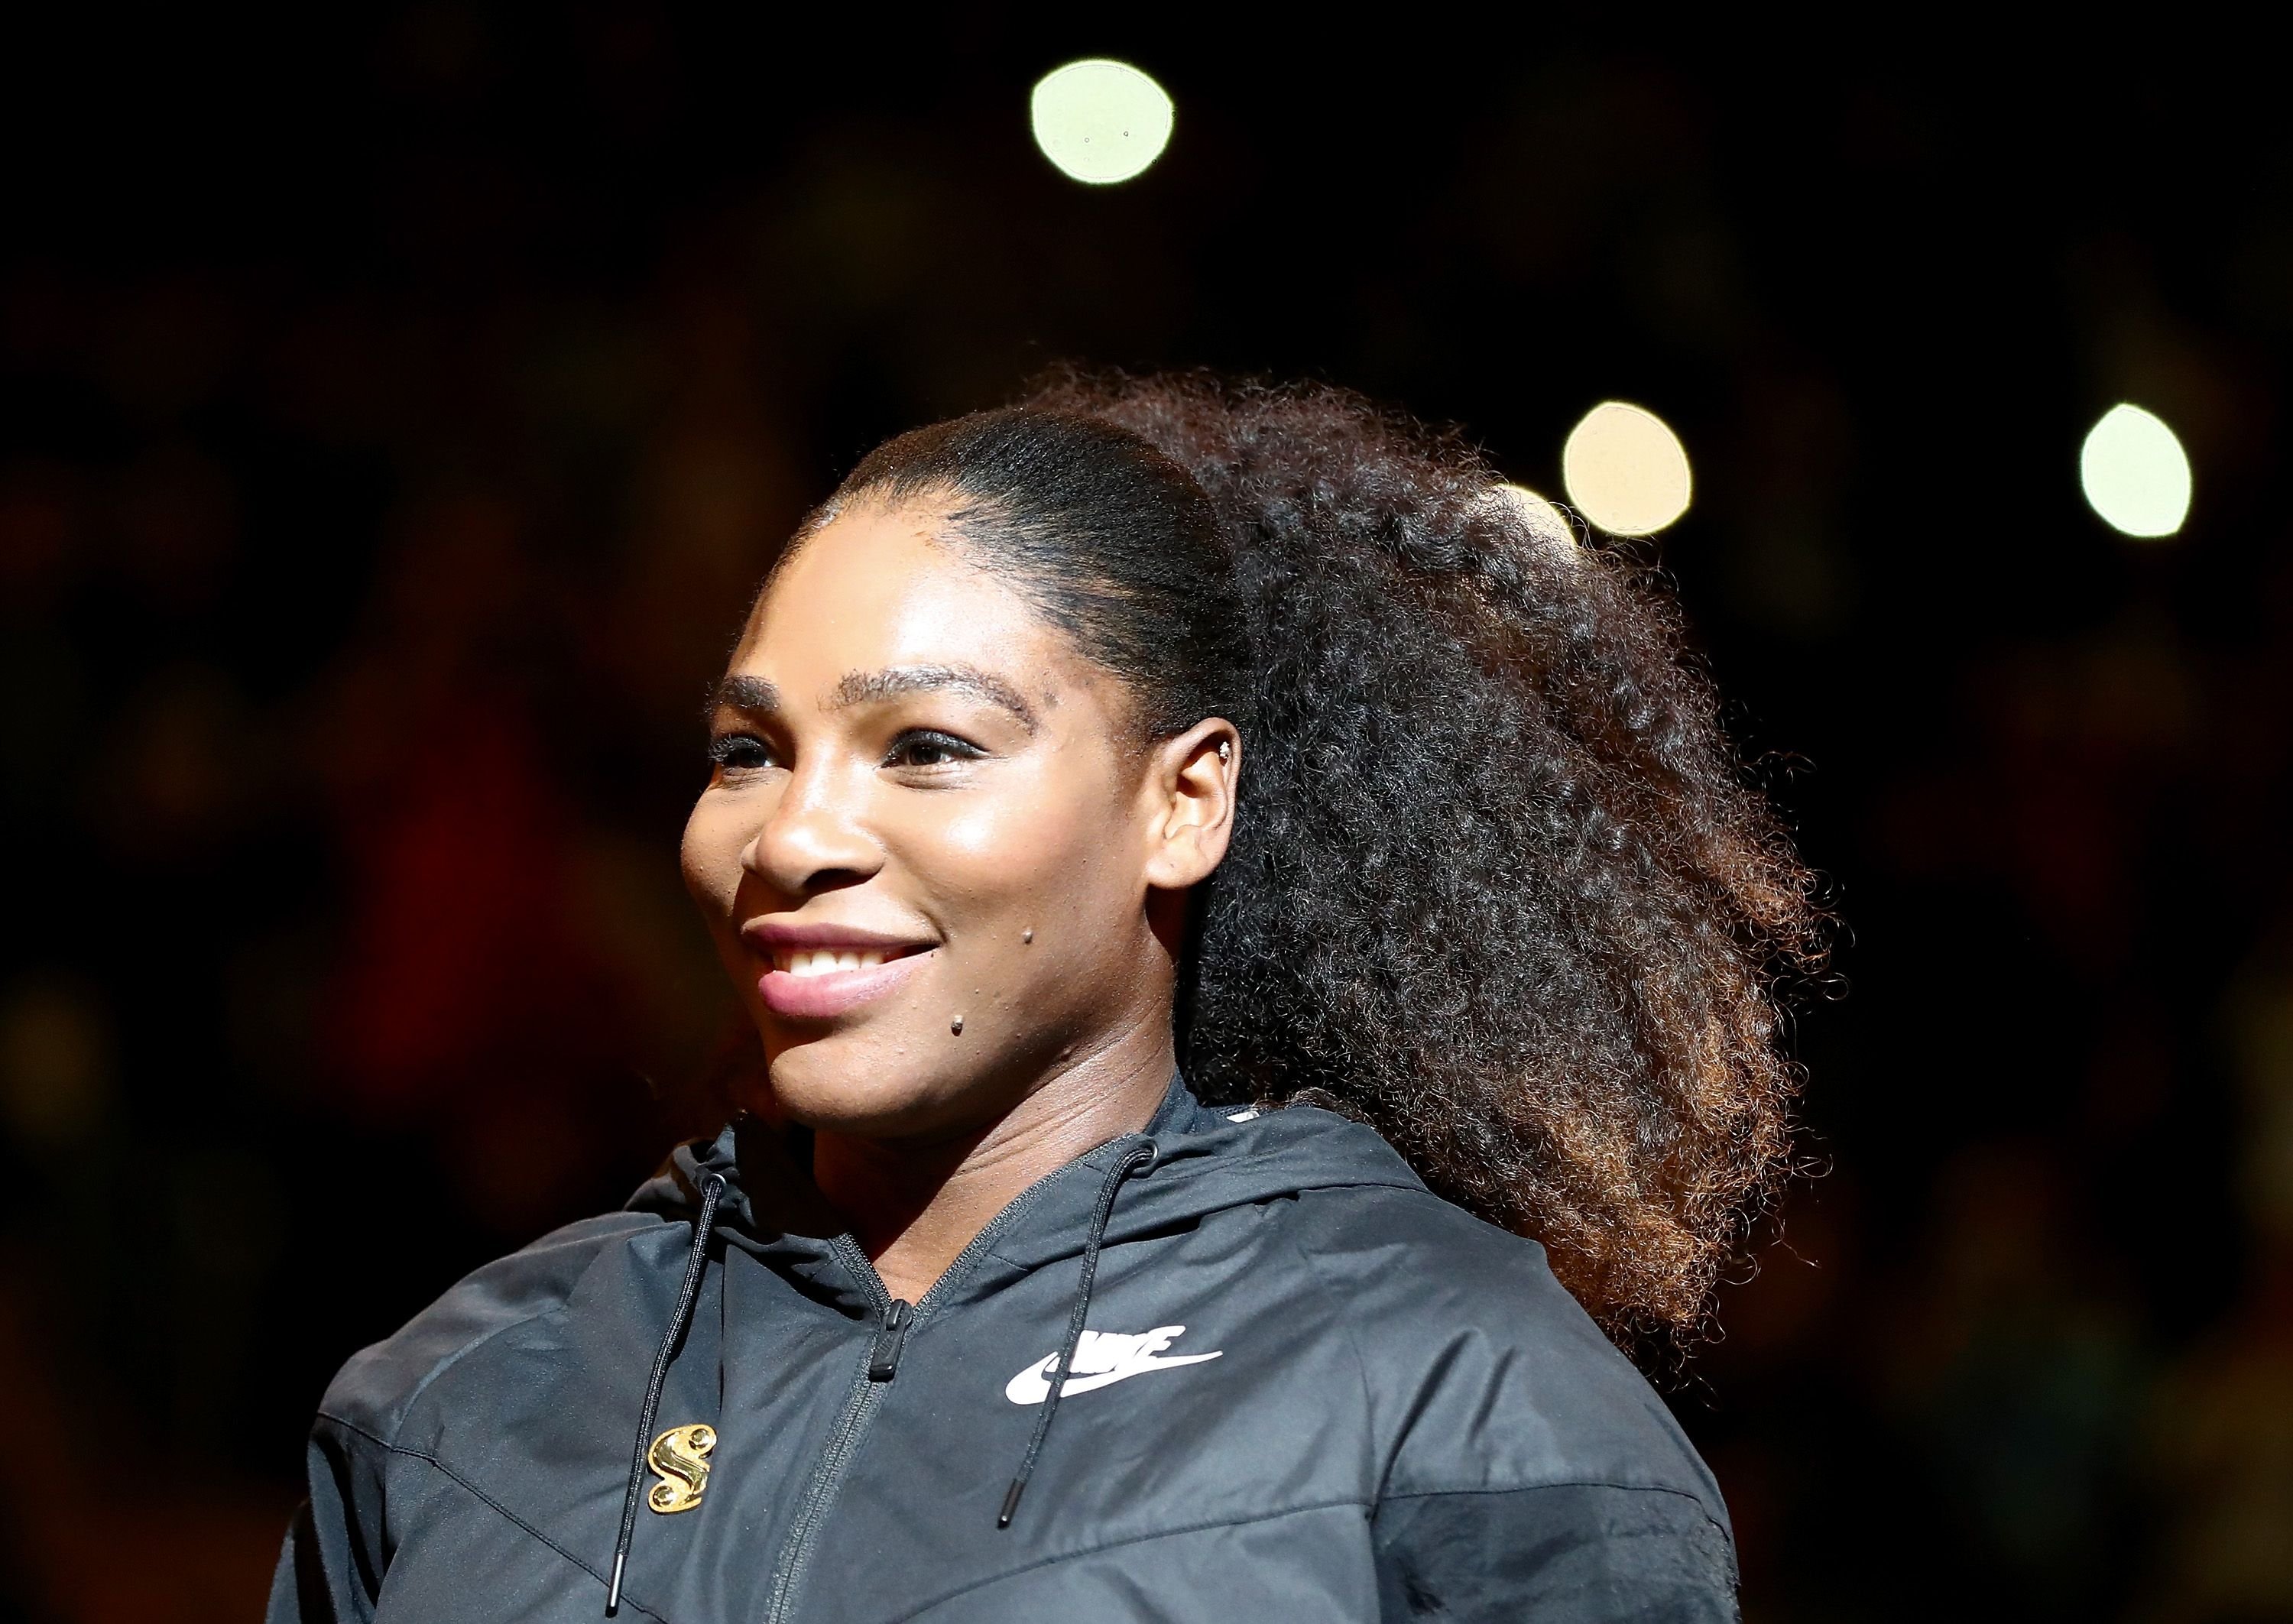 Tennis player Serena Williams walking into the arena as she is presented before the start of the Tie Break Tens at Madison Square Garden on the March 5, 2018 in New York. │Photo: Getty Images